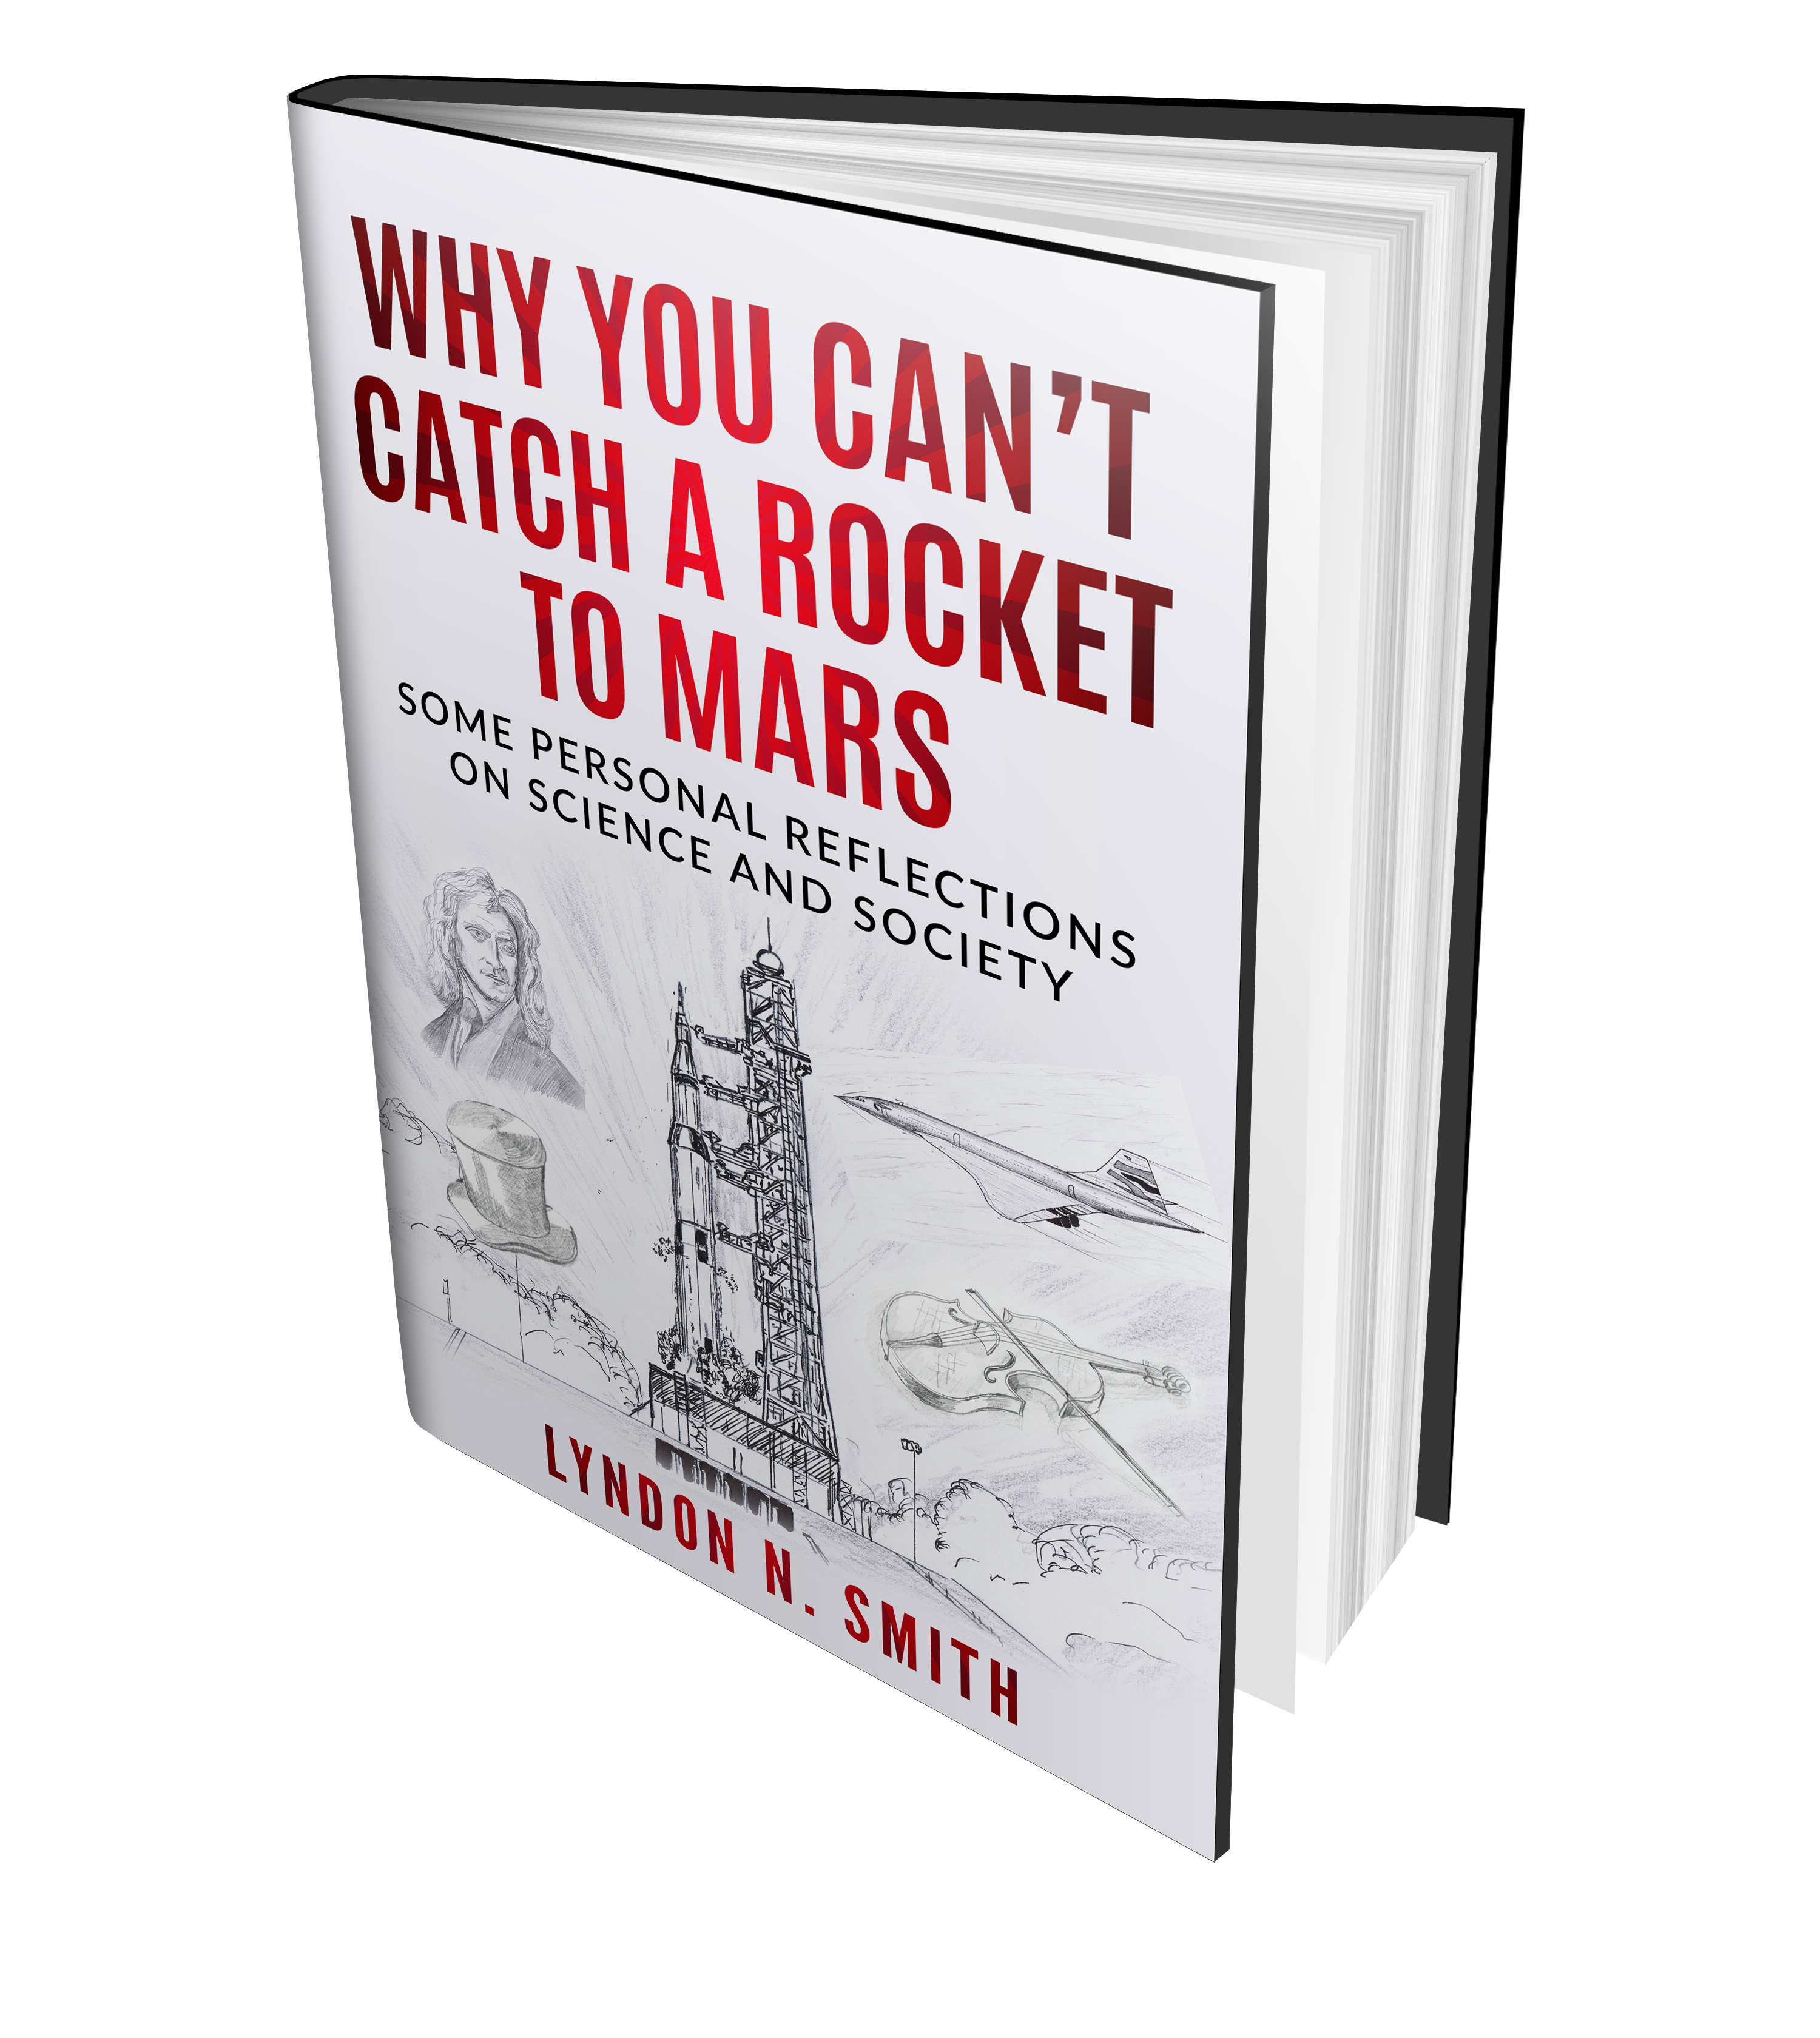 FREE: Why You Can’t Catch a Rocket to Mars: Some Personal Reflections on Science and Society, by Lyndon N. Smith by Lyndon Smith